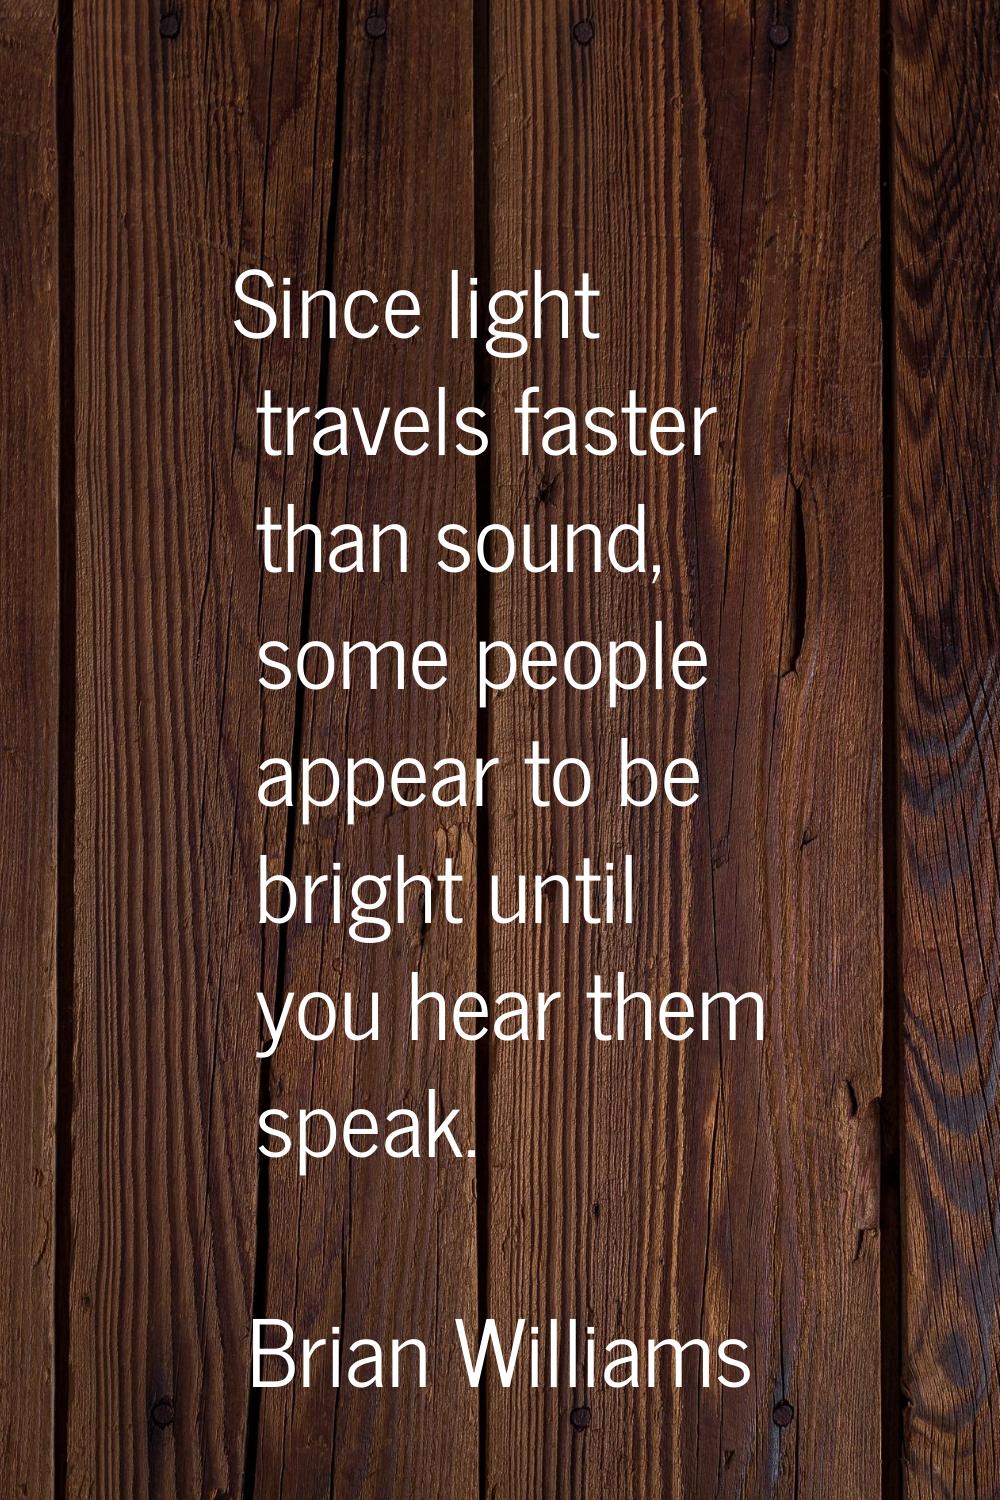 Since light travels faster than sound, some people appear to be bright until you hear them speak.